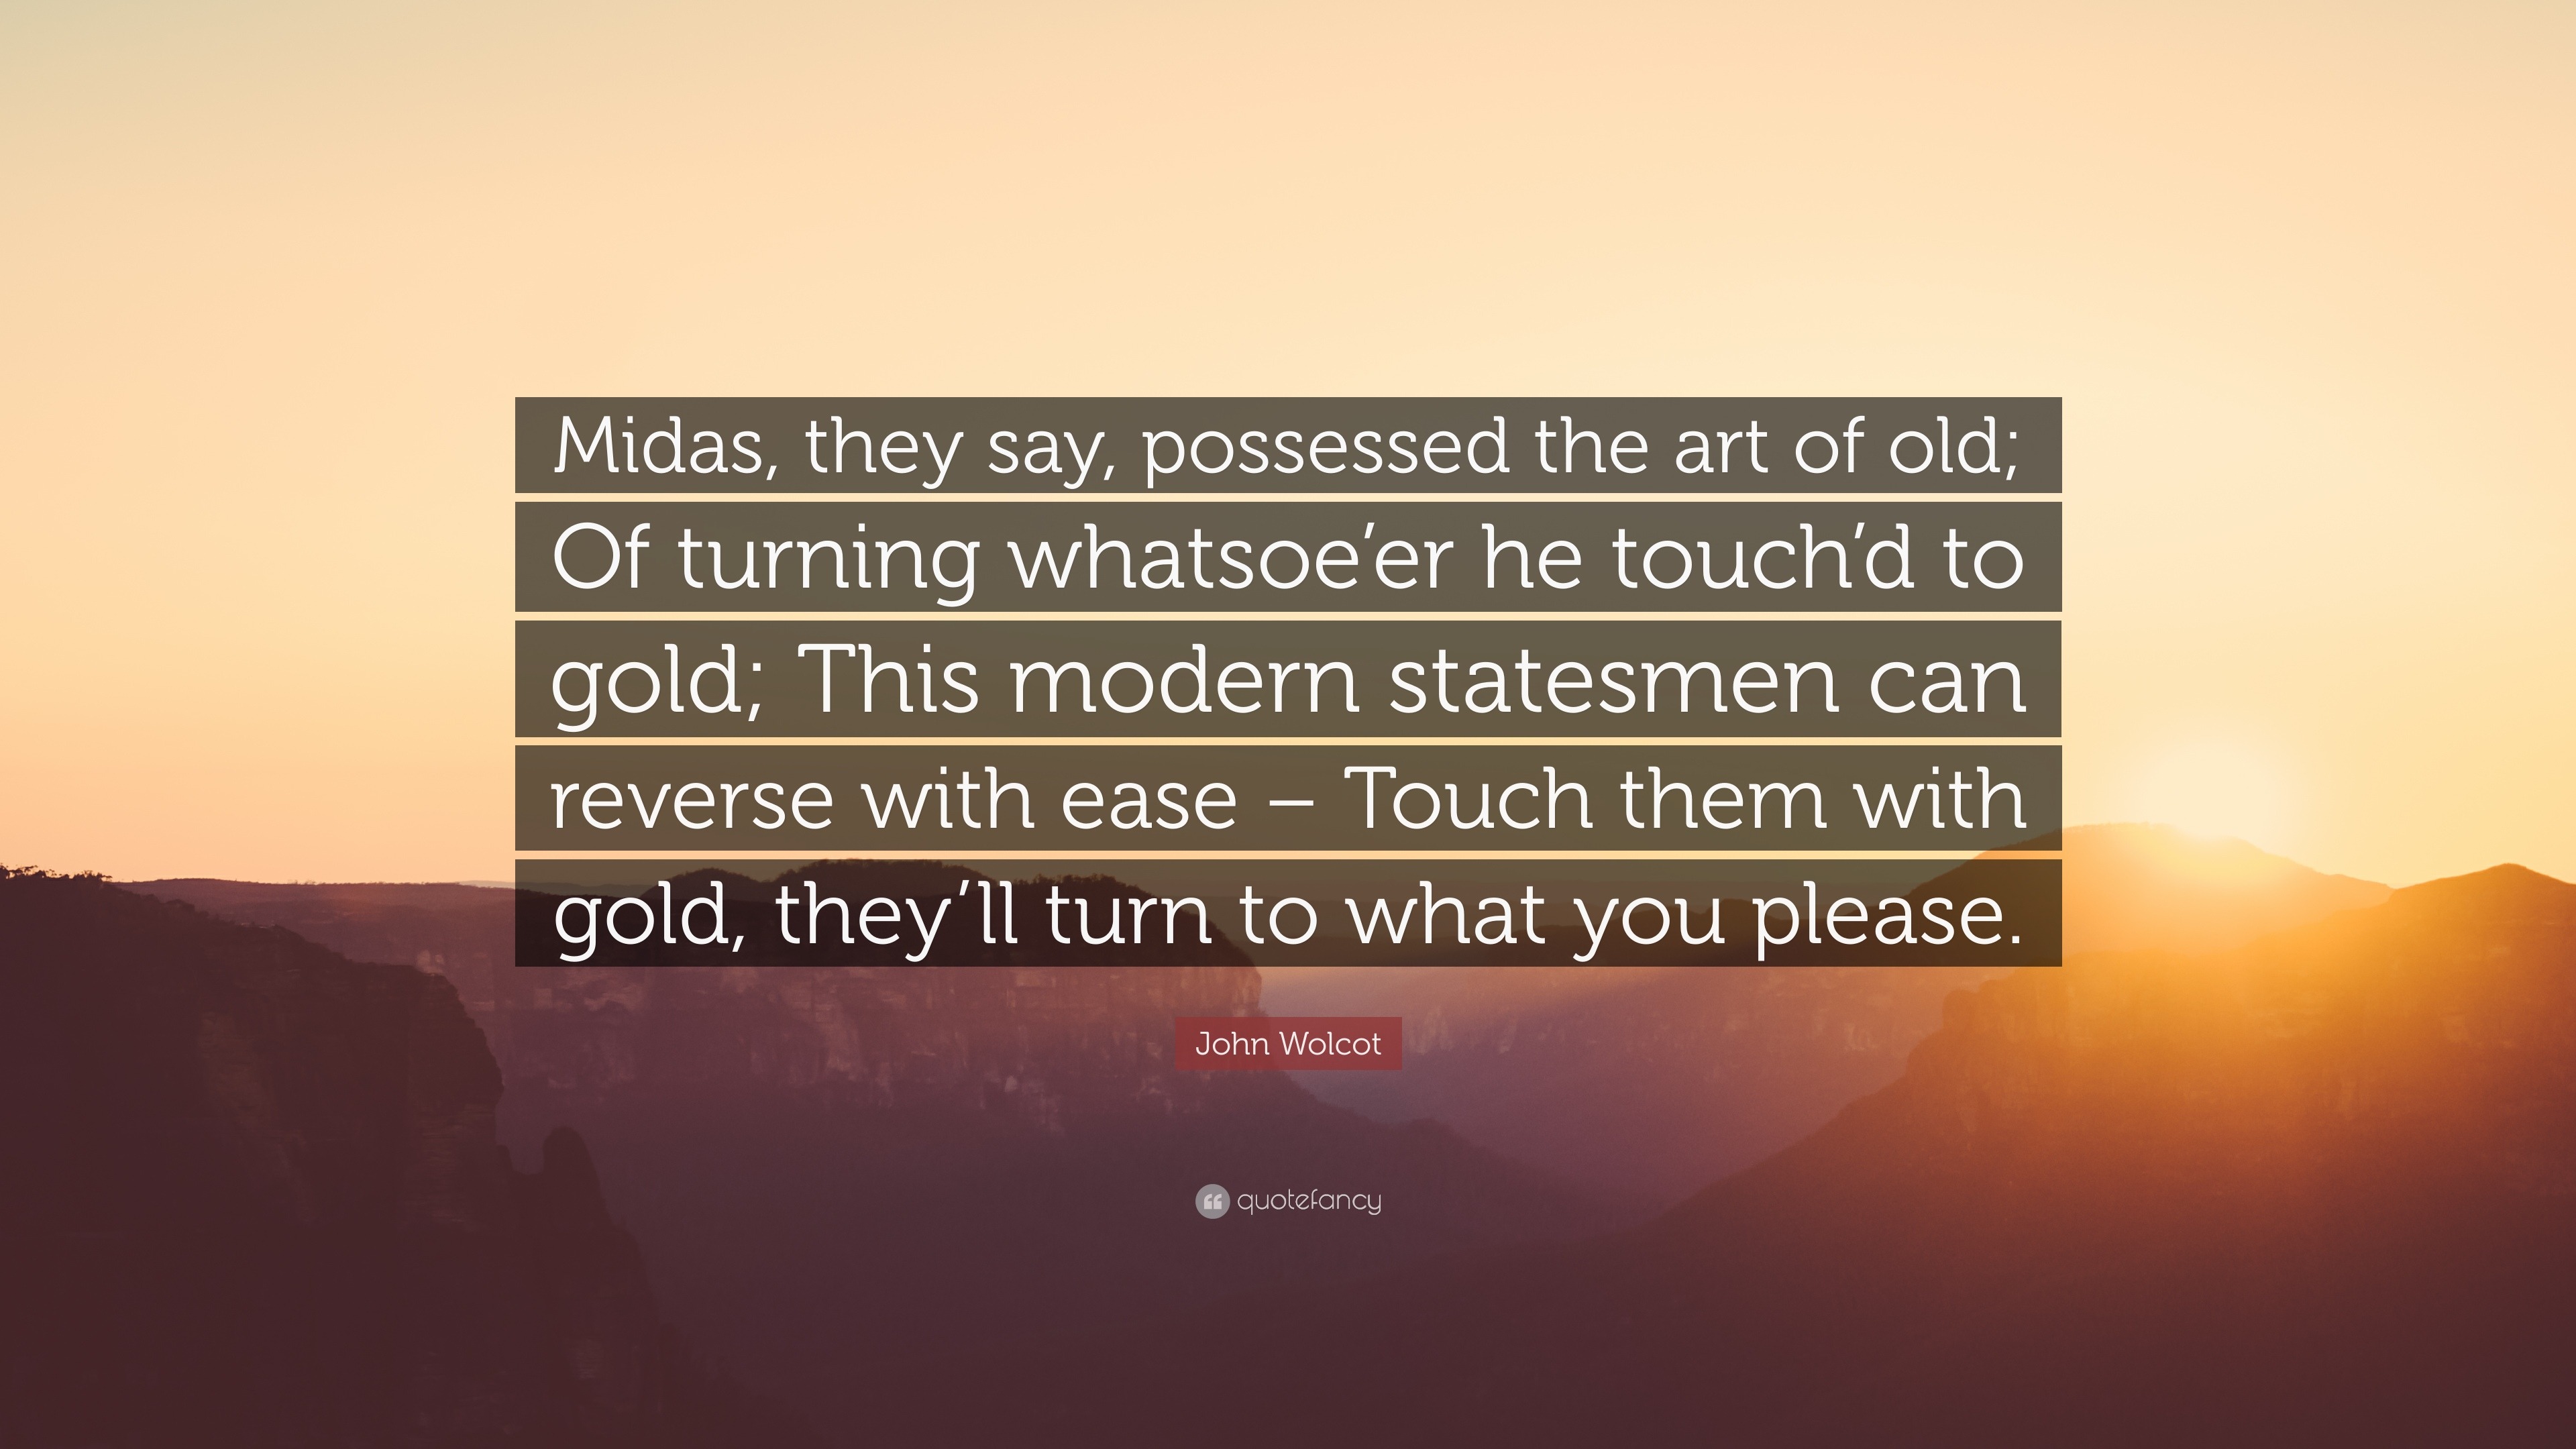 New midas touch Quotes, Status, Photo, Video